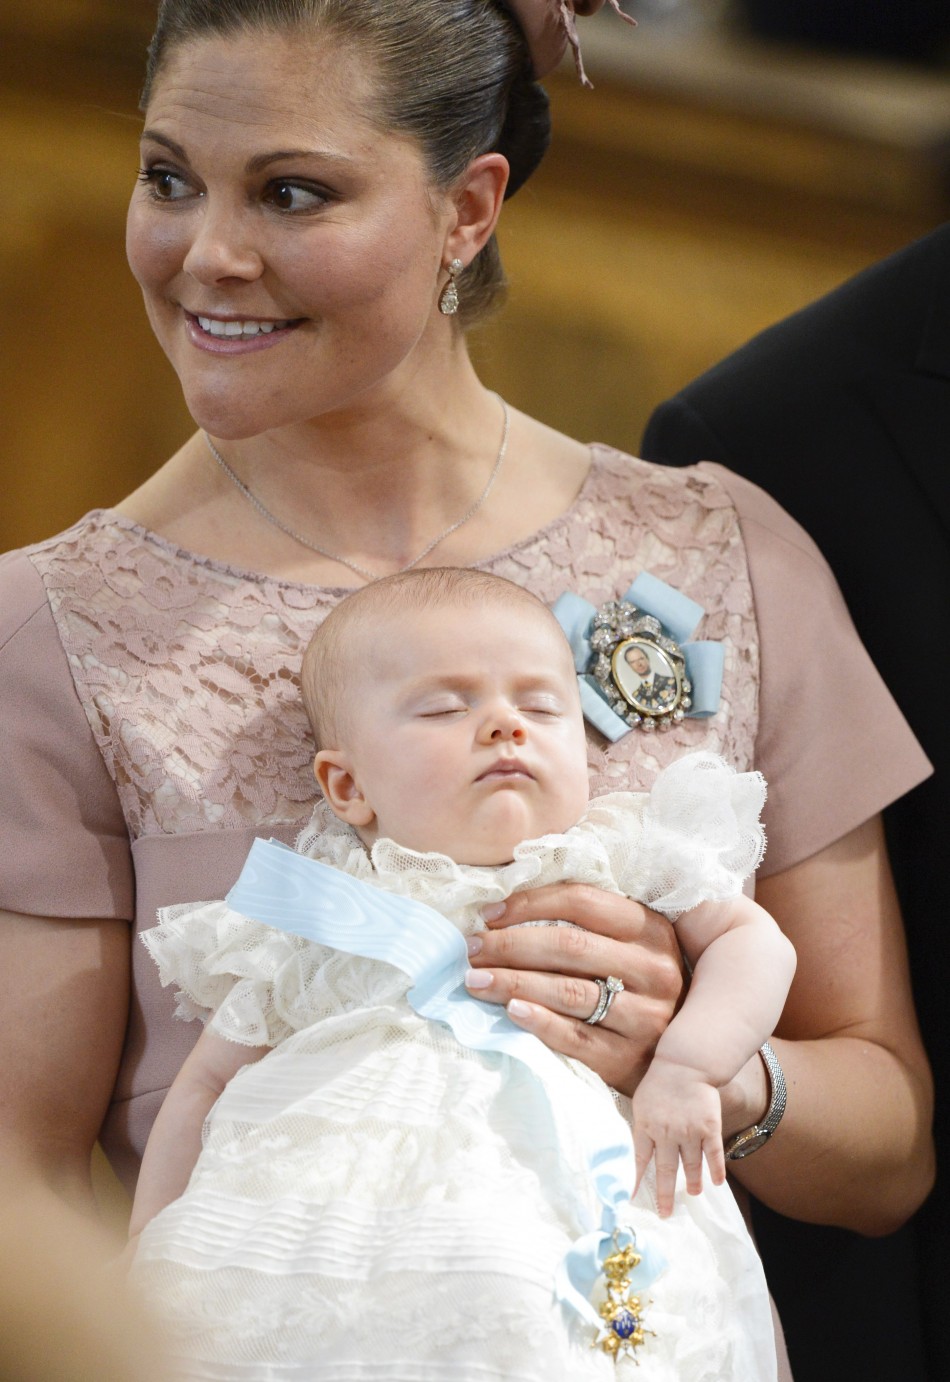 Swedens Crown Princess Victoria holds Princess Estelle as she stands with Prince Daniel after the christening ceremony, held at the Royal Chapel in Stockholm